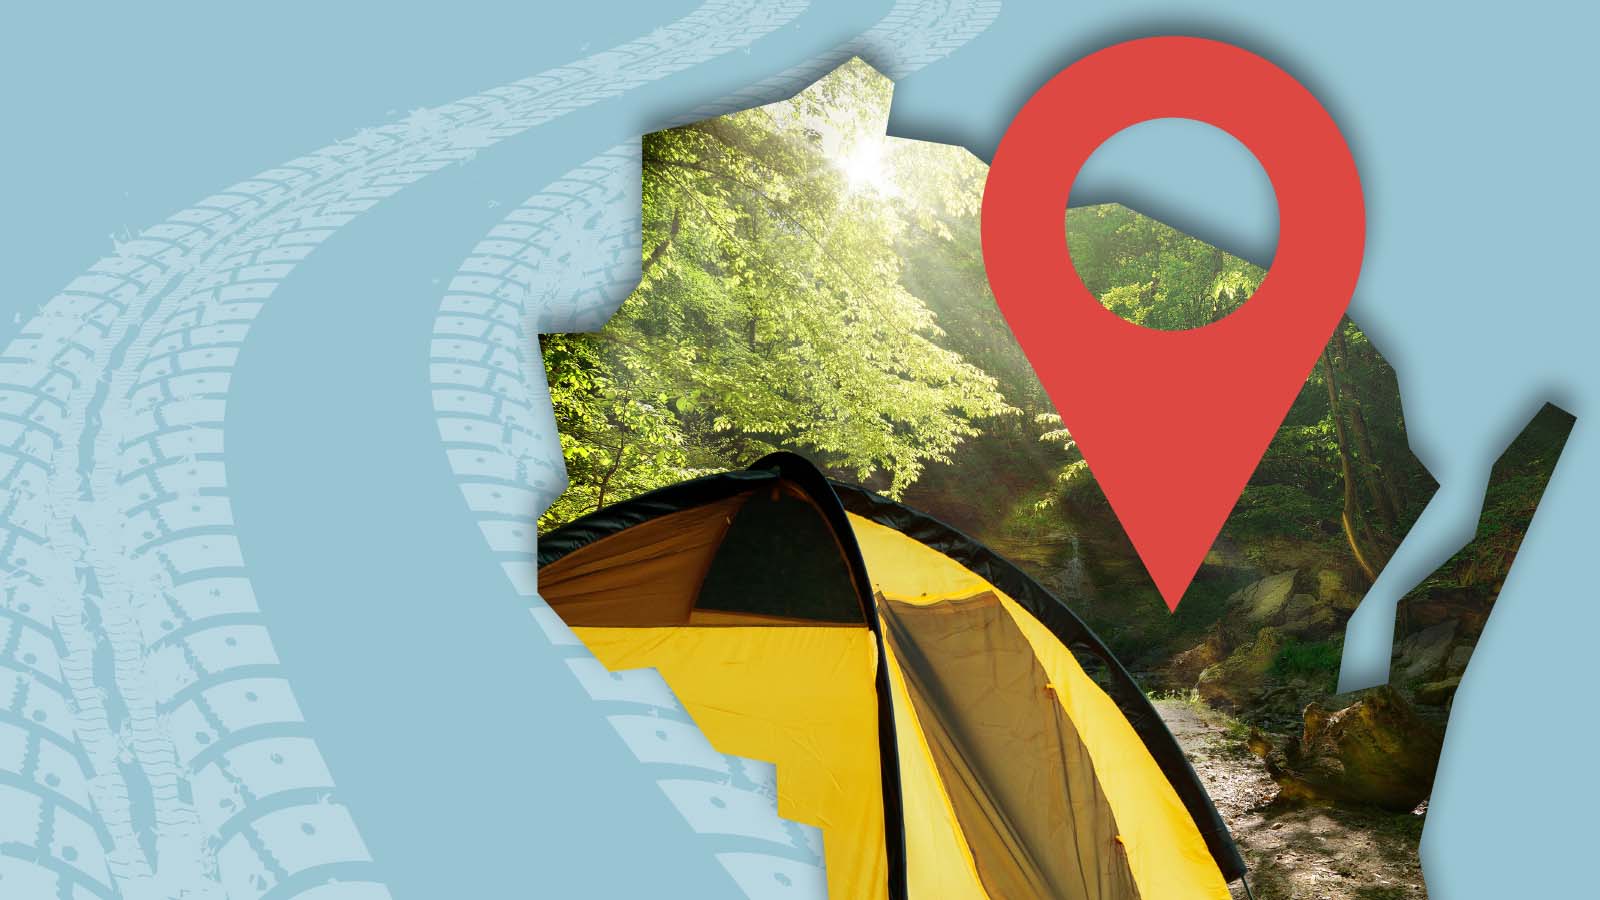 Image of Wisconsin outline with camping image inside